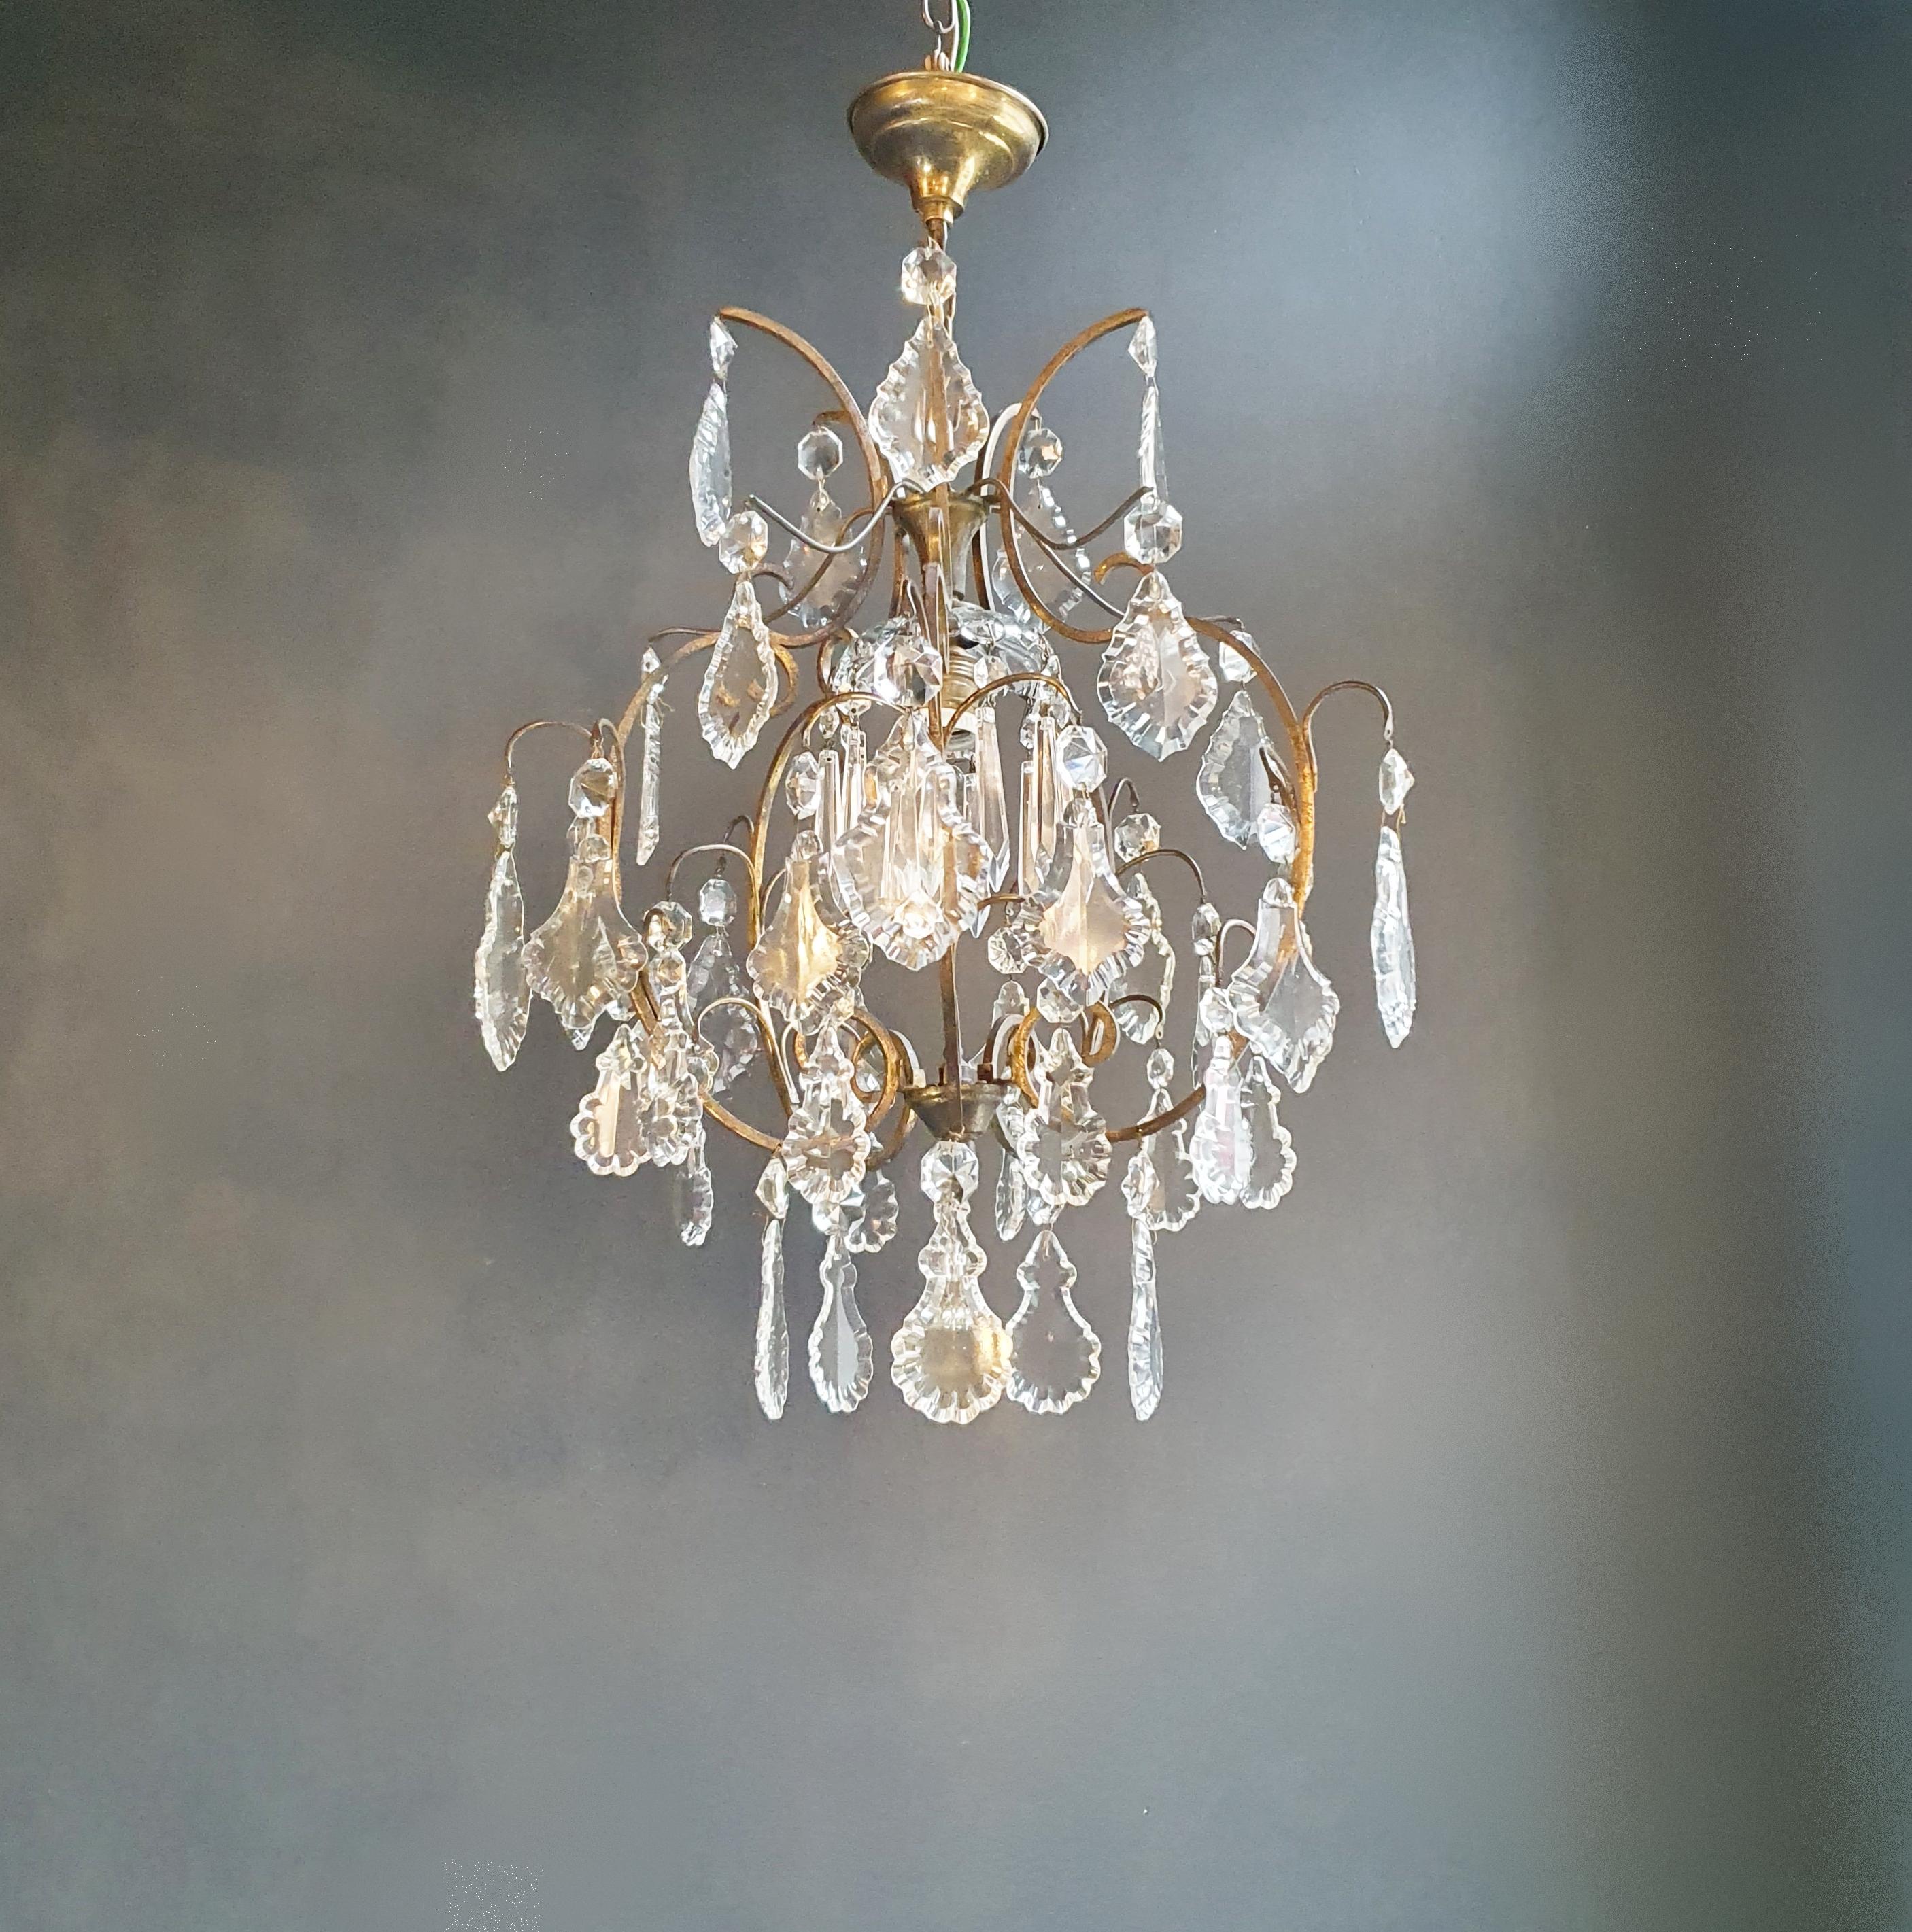 Restored Vintage Chandelier: A Testament to Craftsmanship and Timeless Beauty

Step into the world of elegance and nostalgia with this antique chandelier, meticulously restored in Berlin with utmost care and professionalism. Its electrical wiring